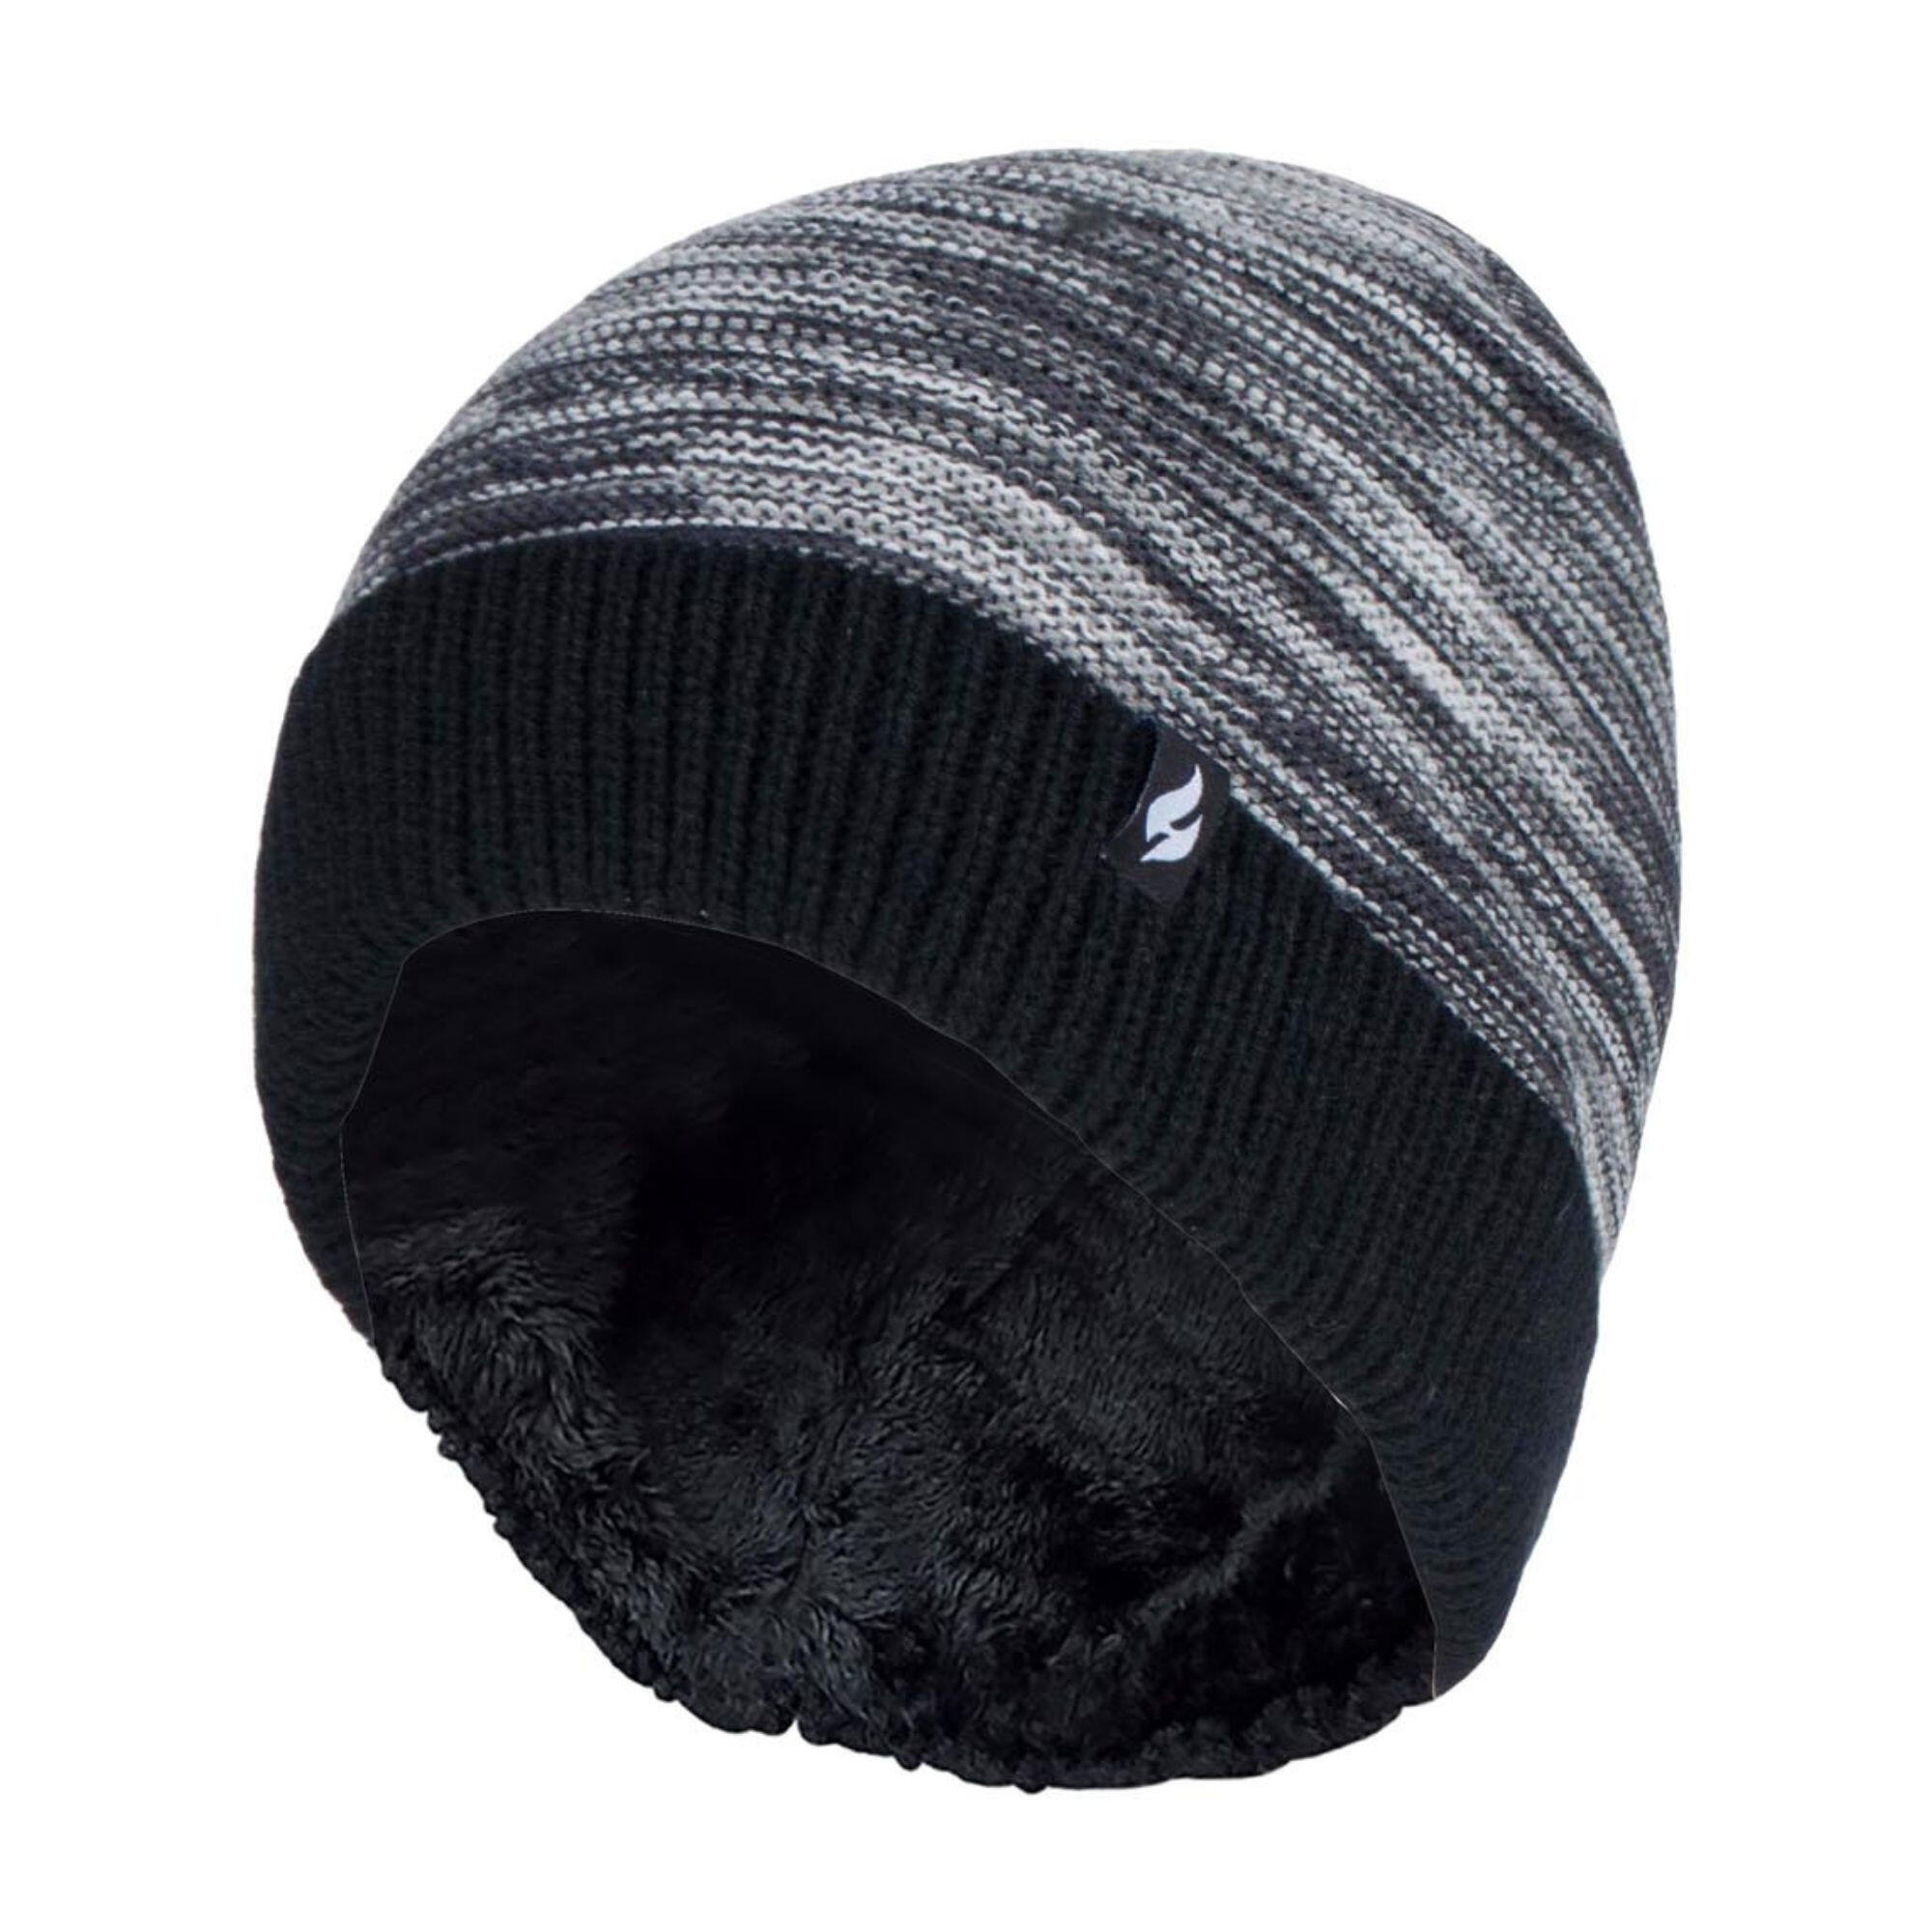 Mens Thermal Knitted Beanie Hat for Winter 1/4